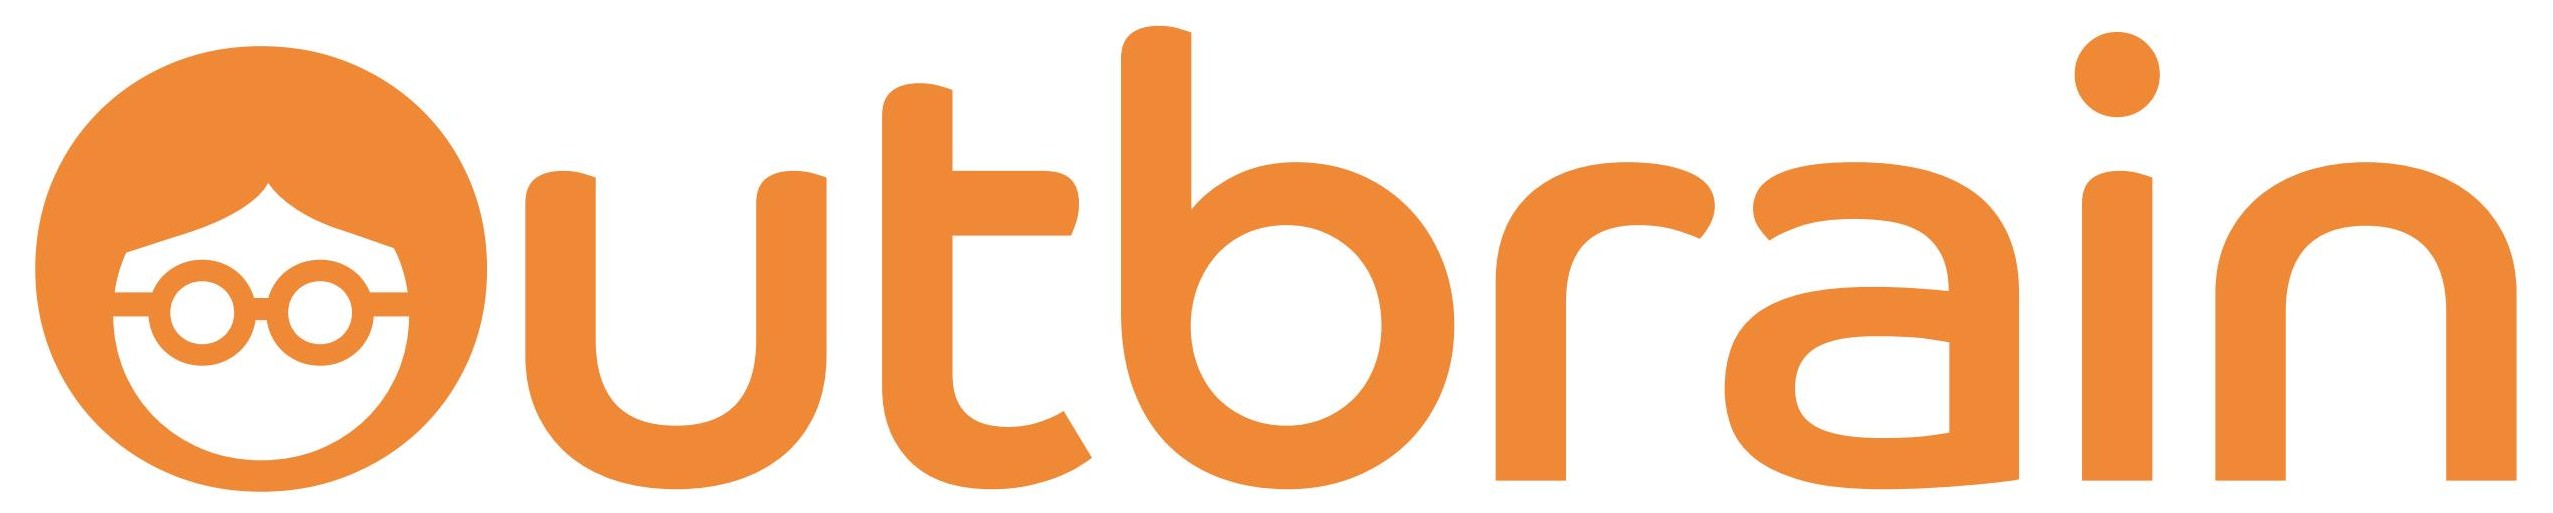 Outbrain Vector PNG-PlusPNG.c